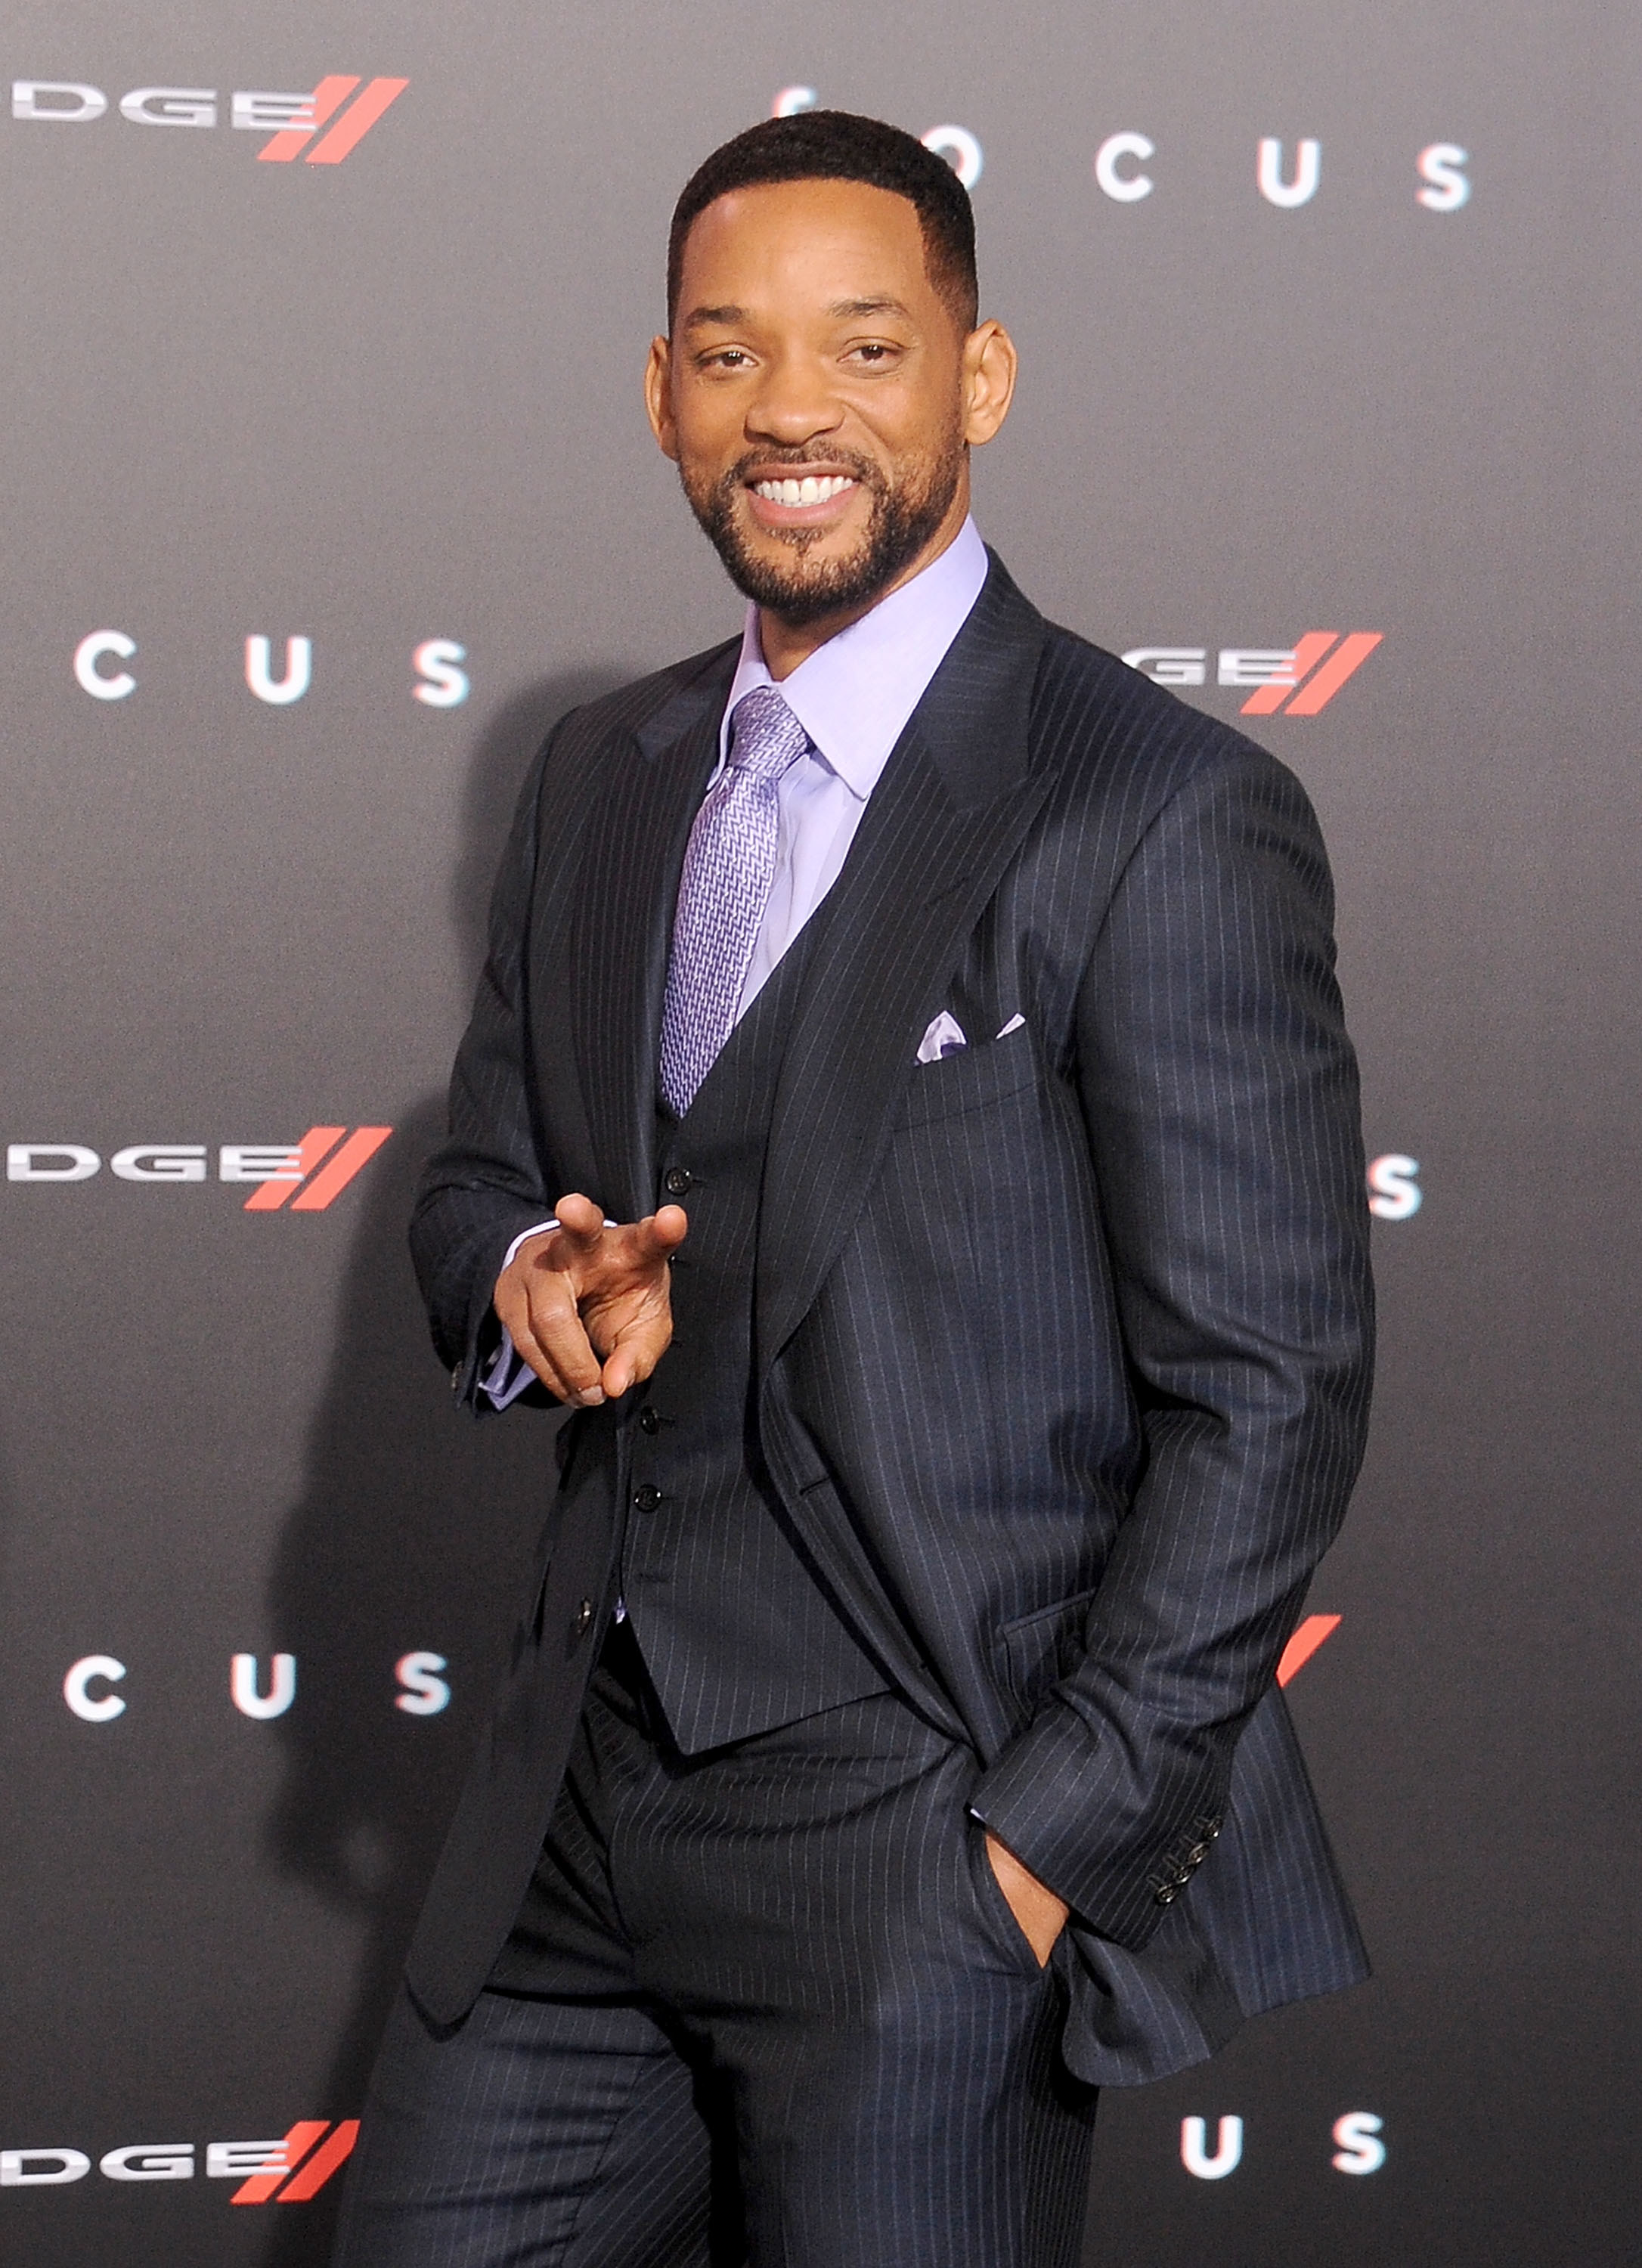 Will Smith smiles and gives the peace sign